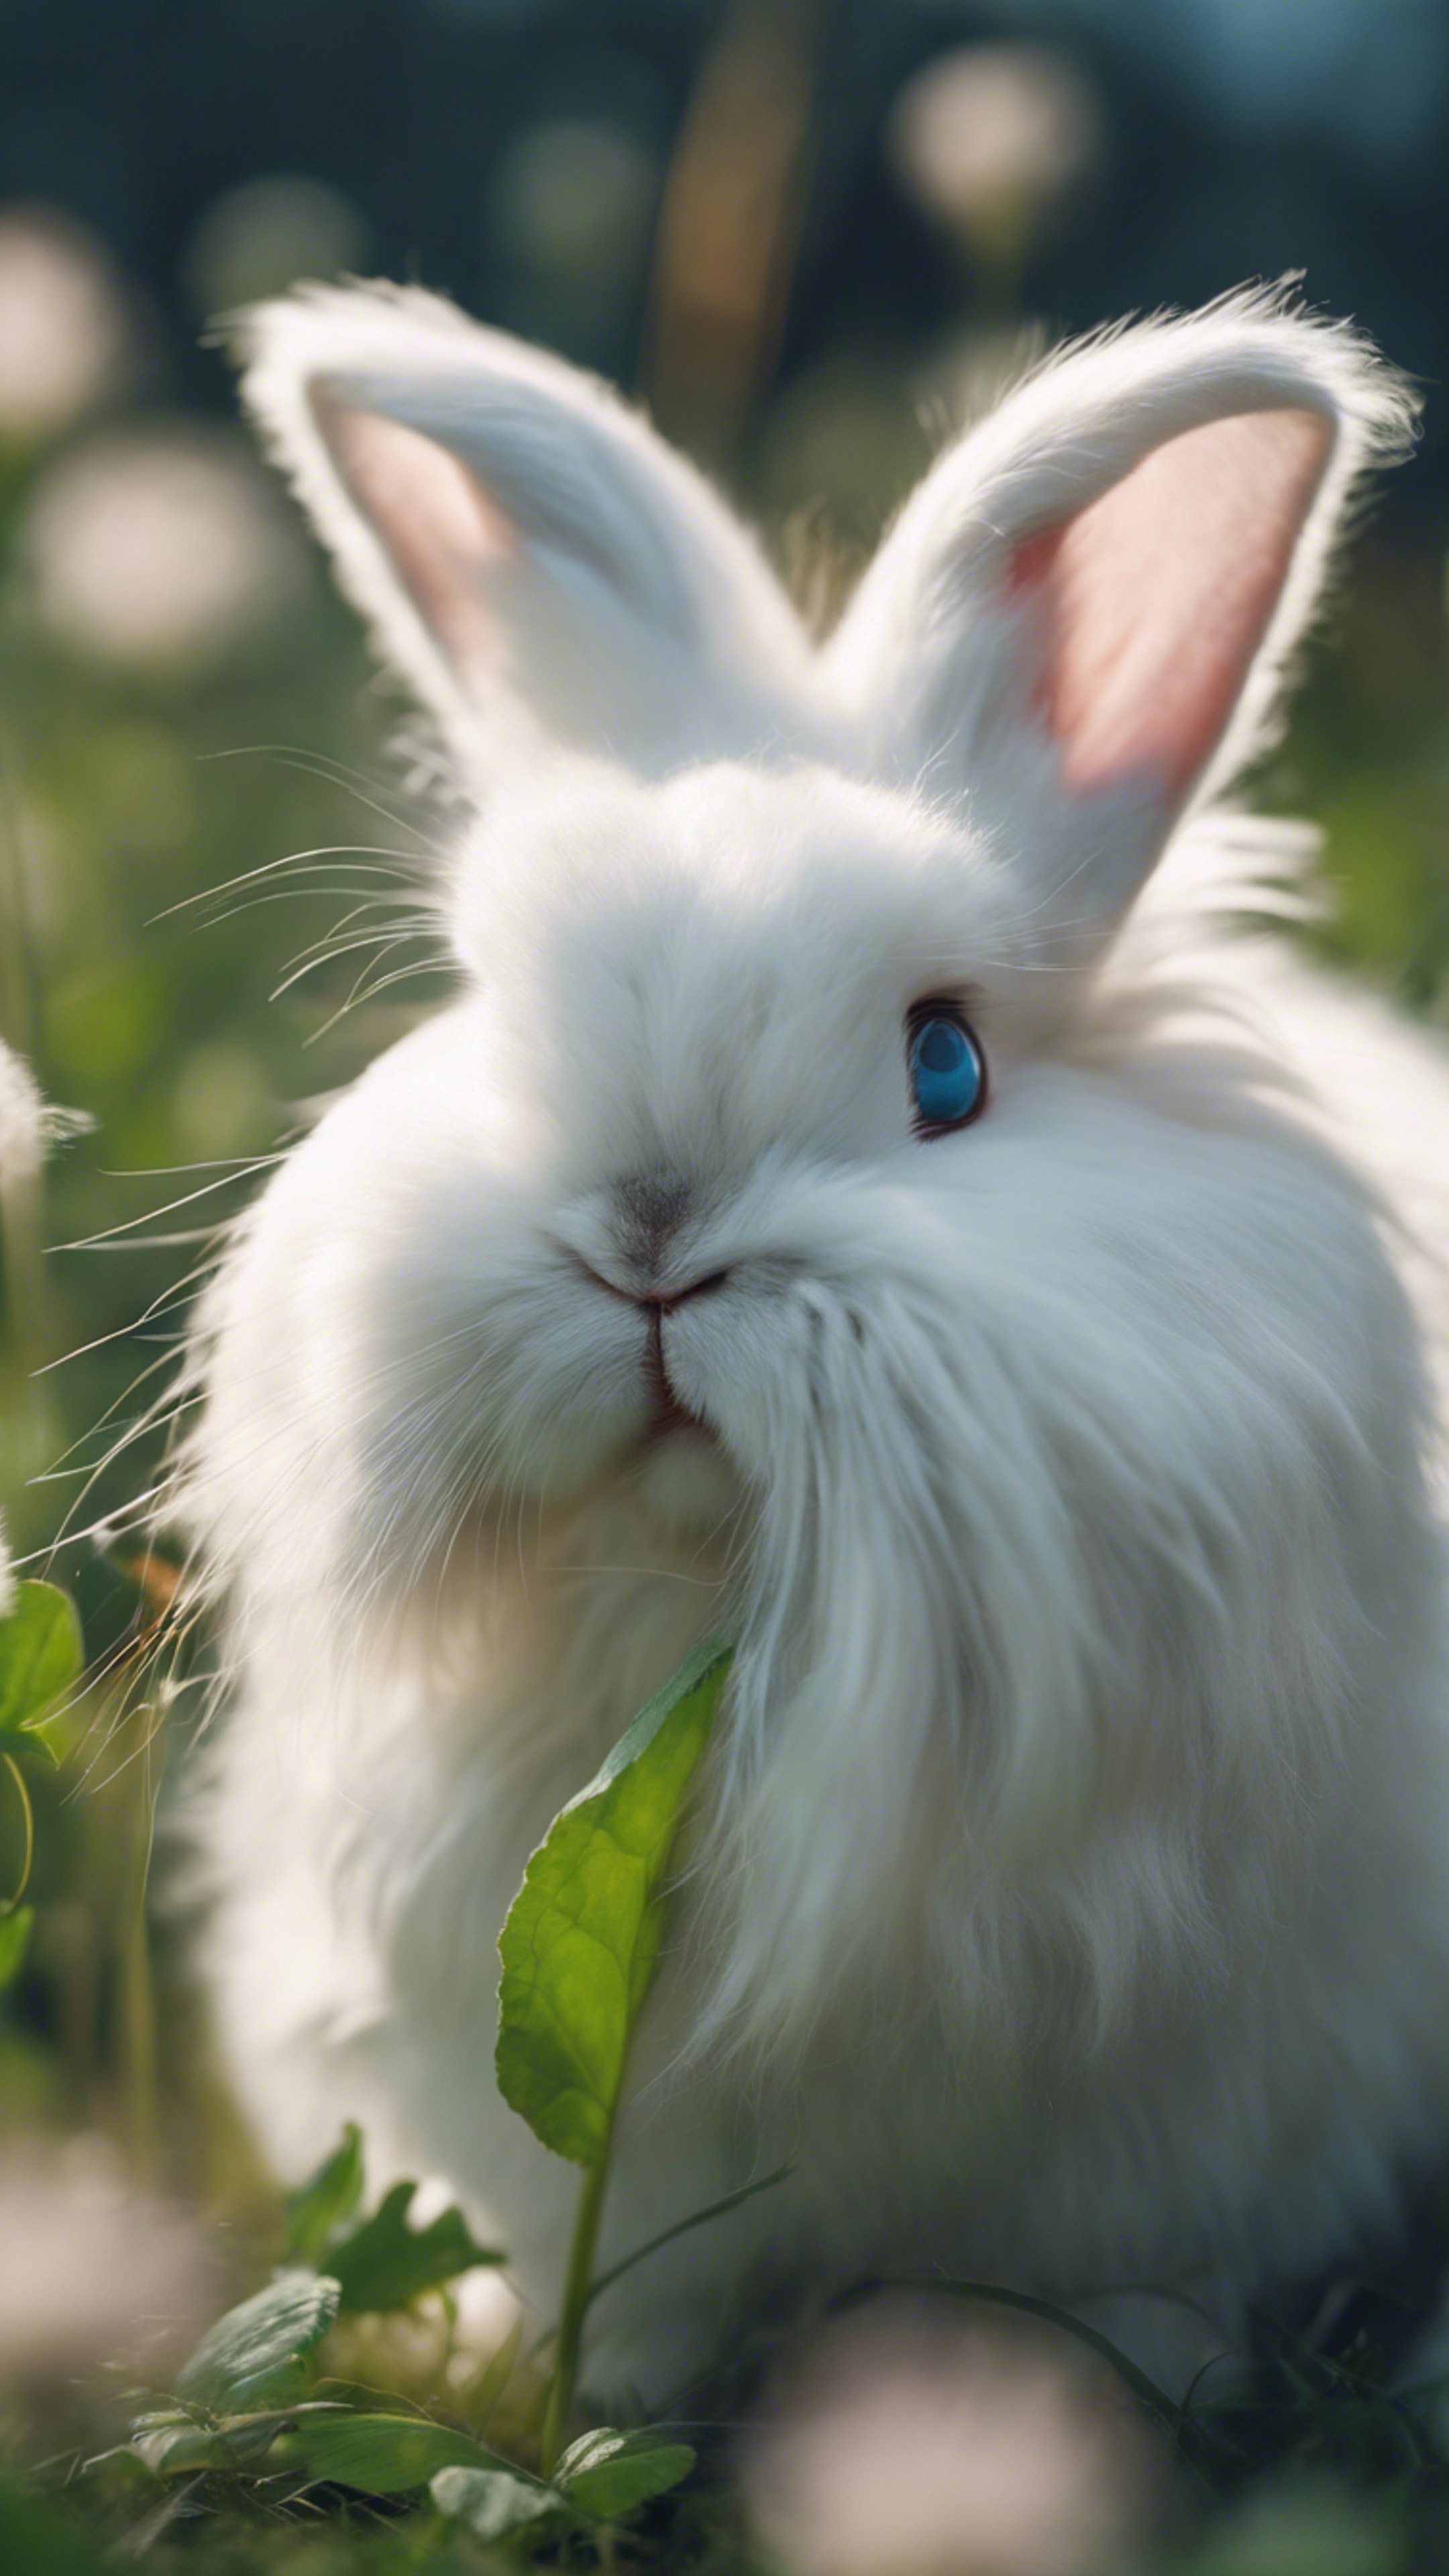 A fluffy angora rabbit with big blue eyes, nestled snugly in a patch of clover. Тапет[a1edfdea4e4b4864b66c]